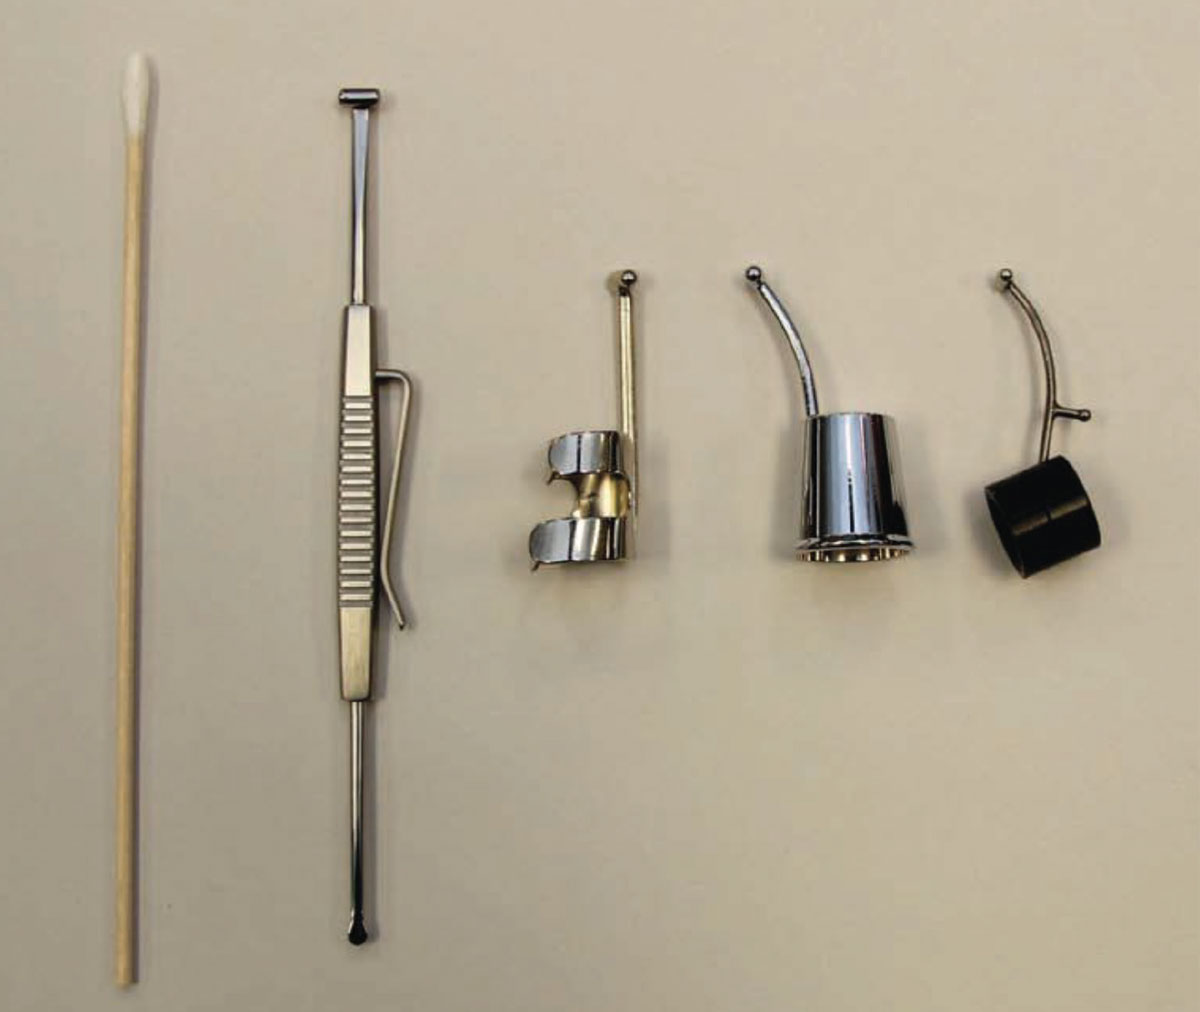 Fig. 5. Different types of scleral depressors, including a cotton-tipped applicator, a flat double-ended depressor and thimble depressors.